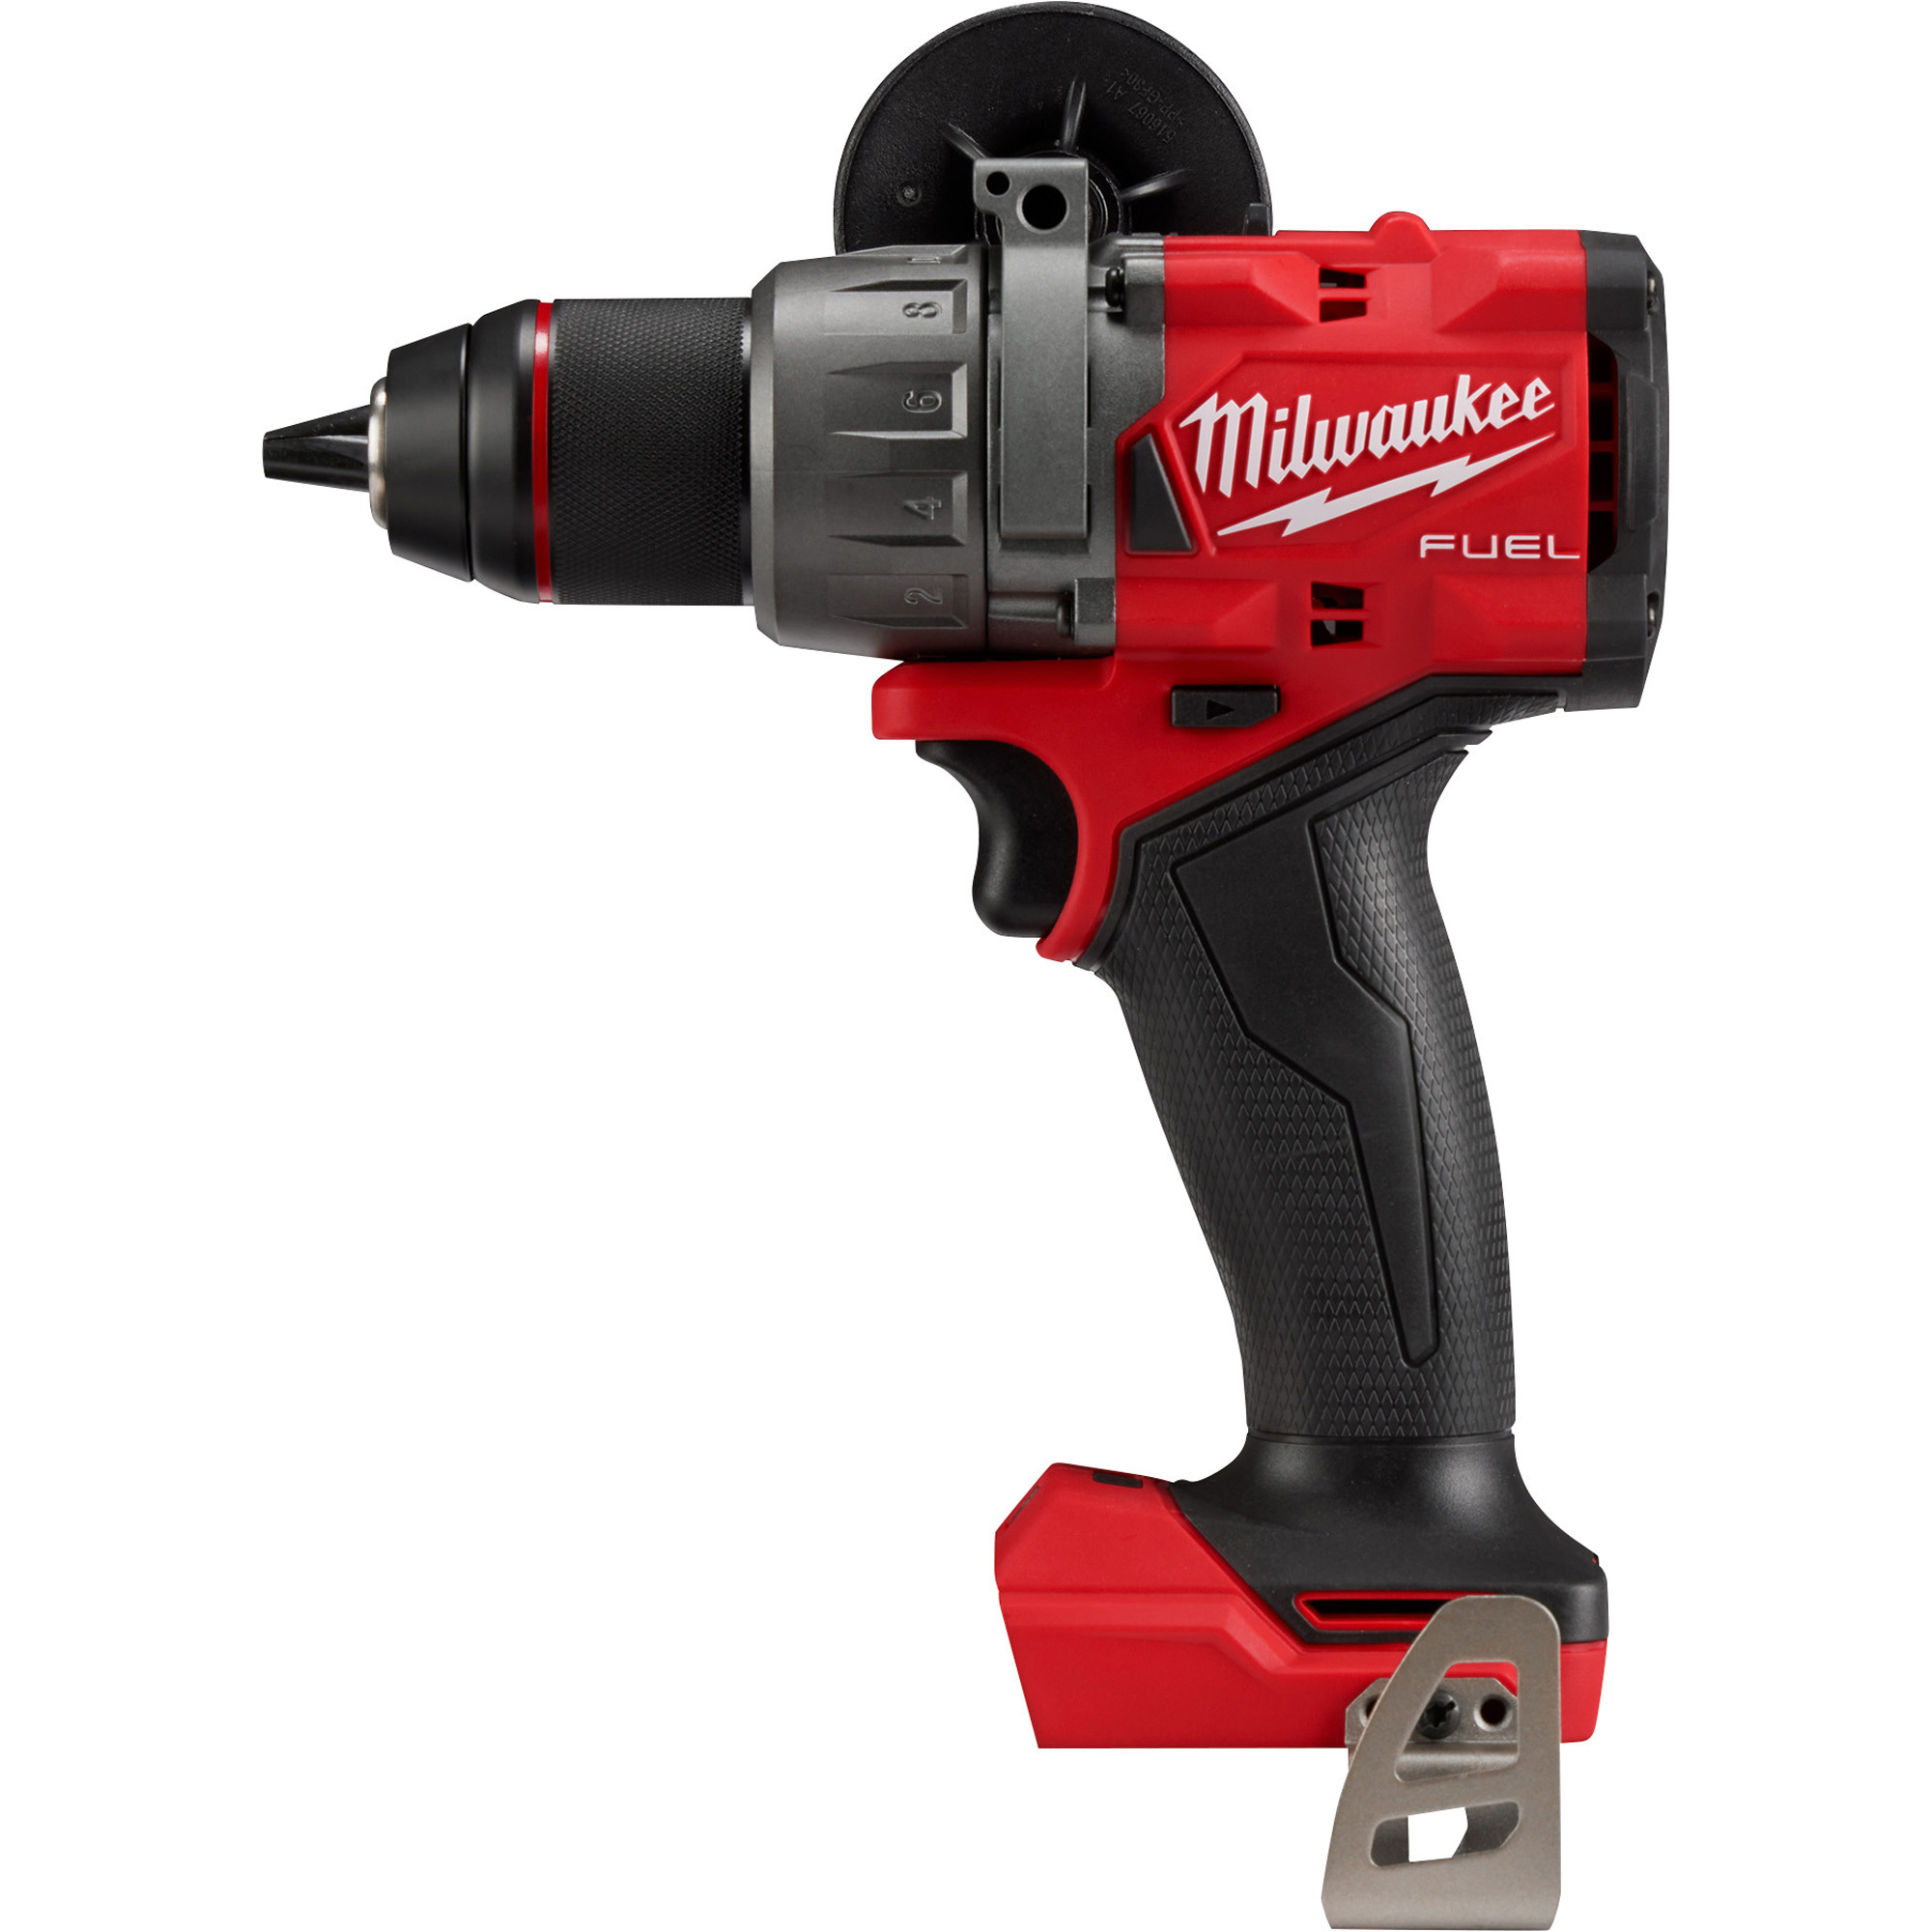 Milwaukee M18 FUEL 1/2Inch Hammer Drill/Driver, Tool Only, Model 2904-20